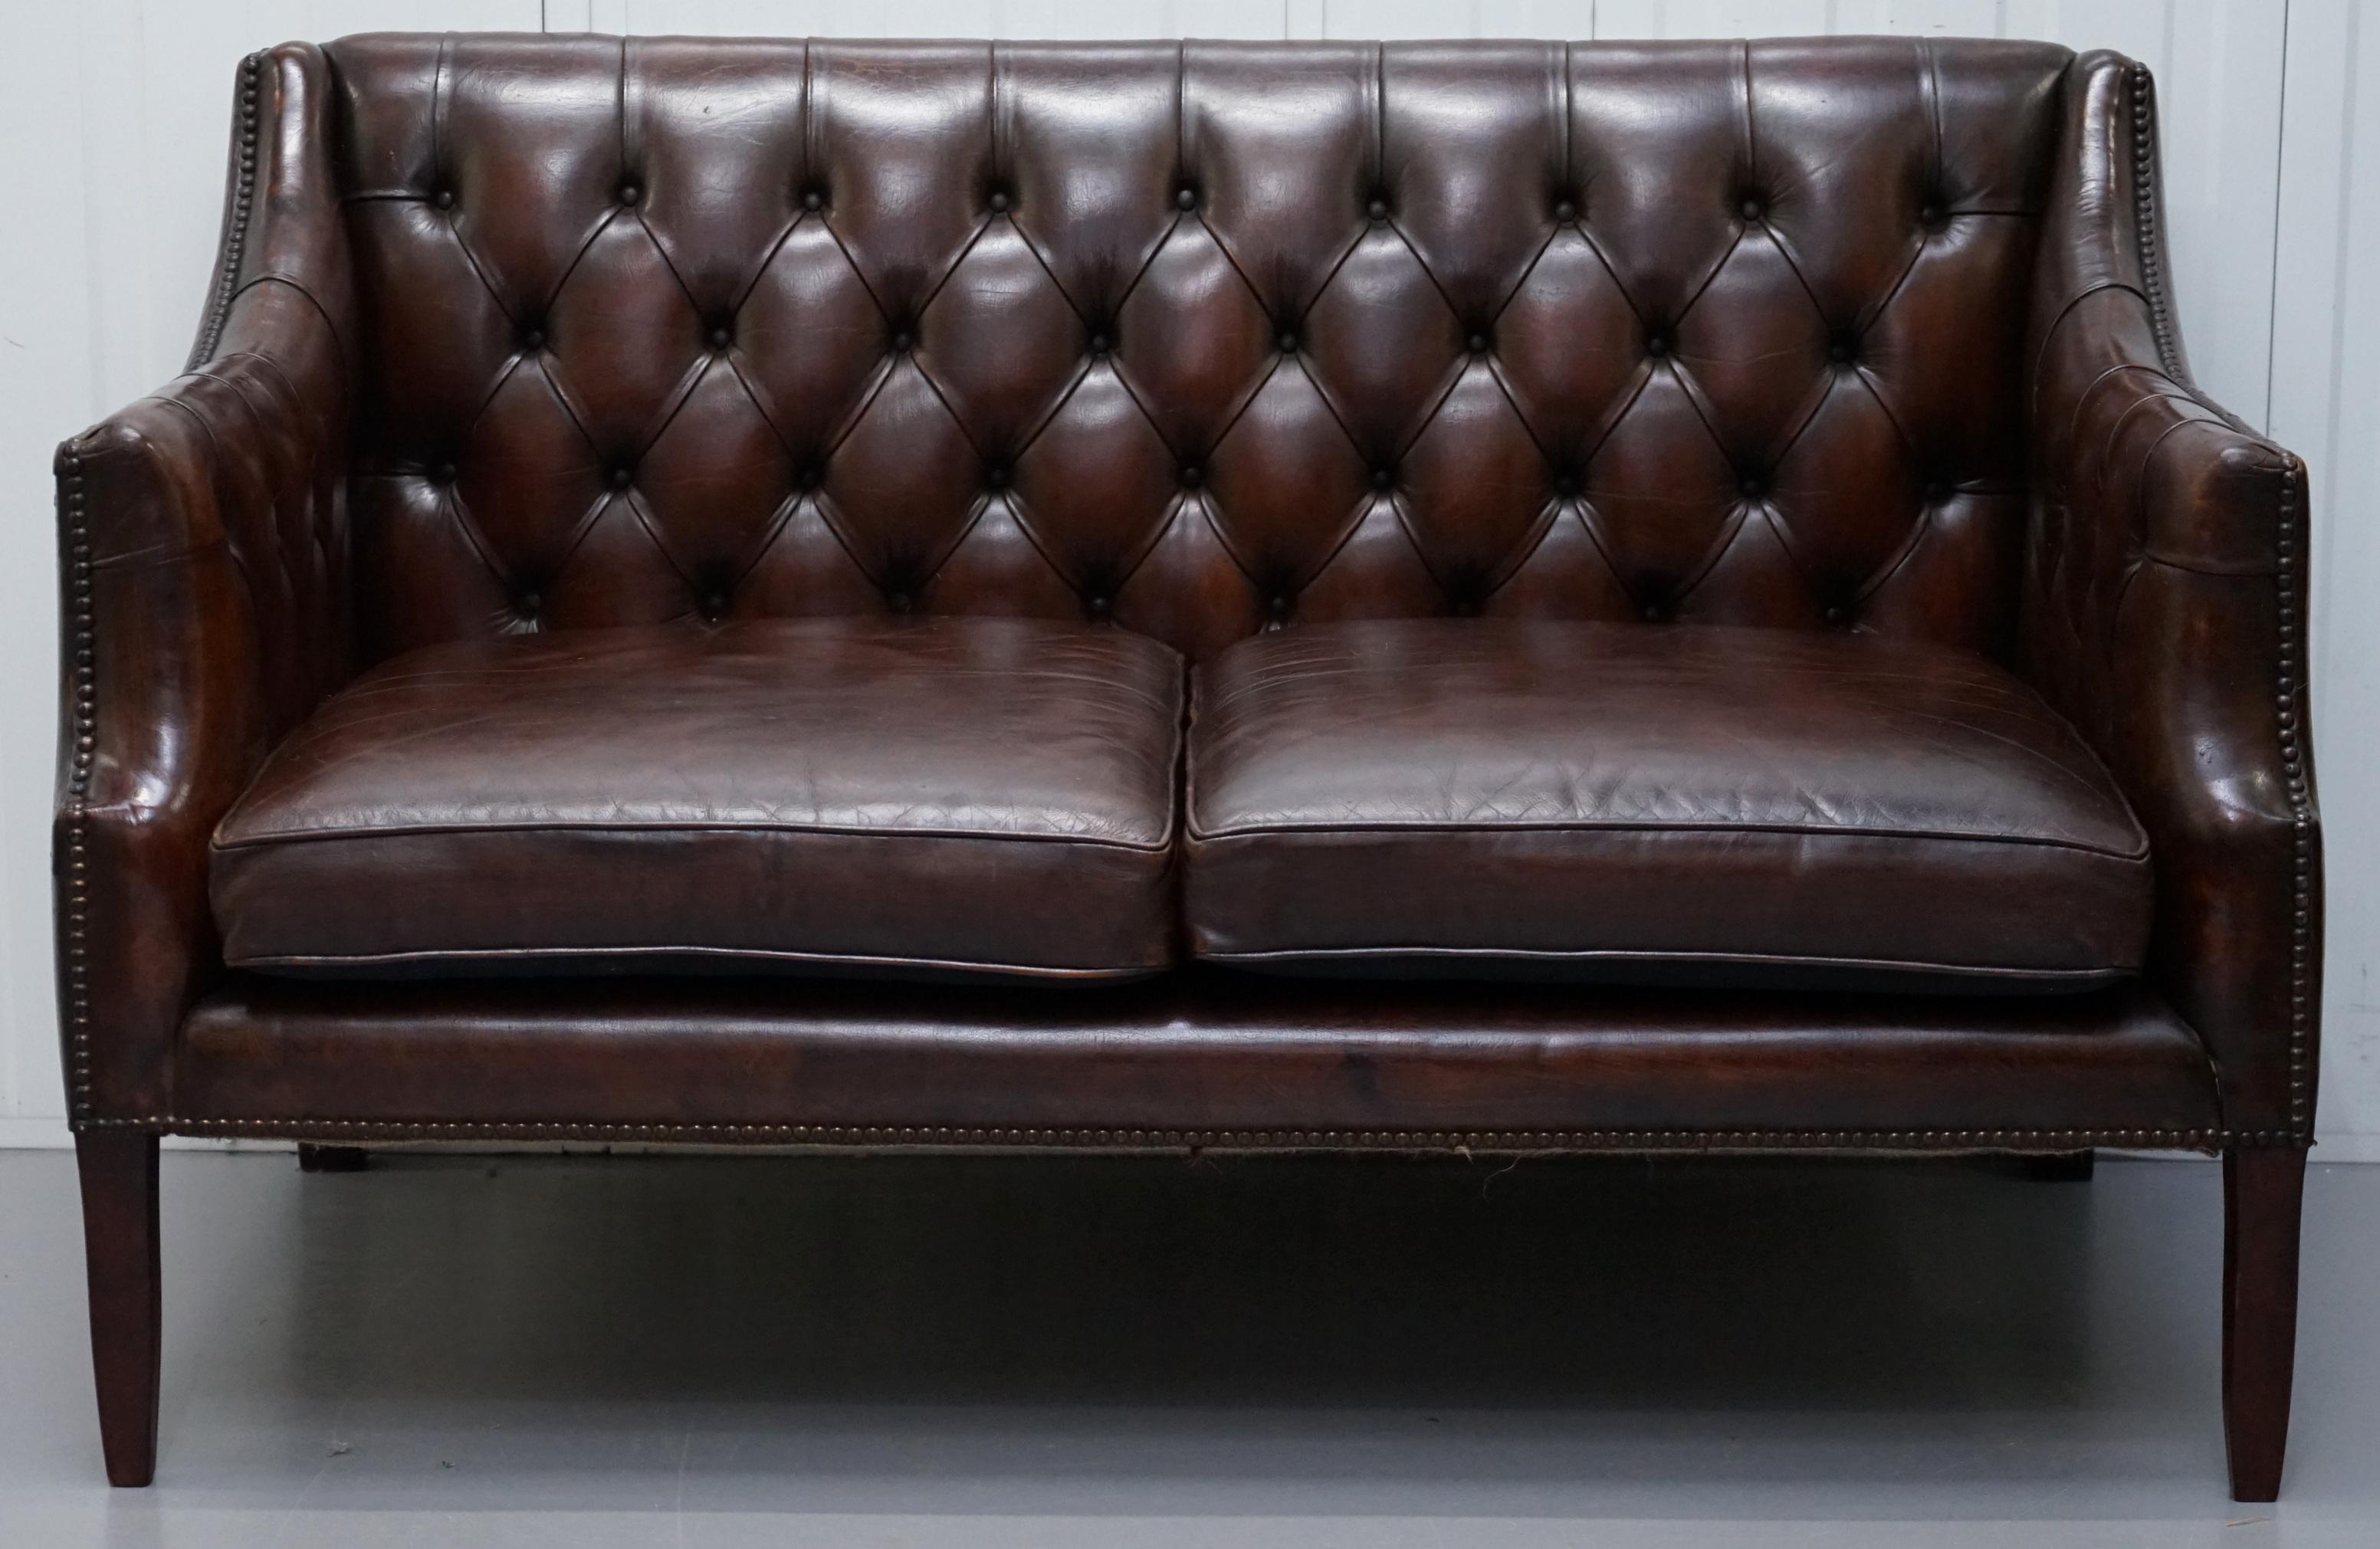 brown chesterfield 2 seater sofa